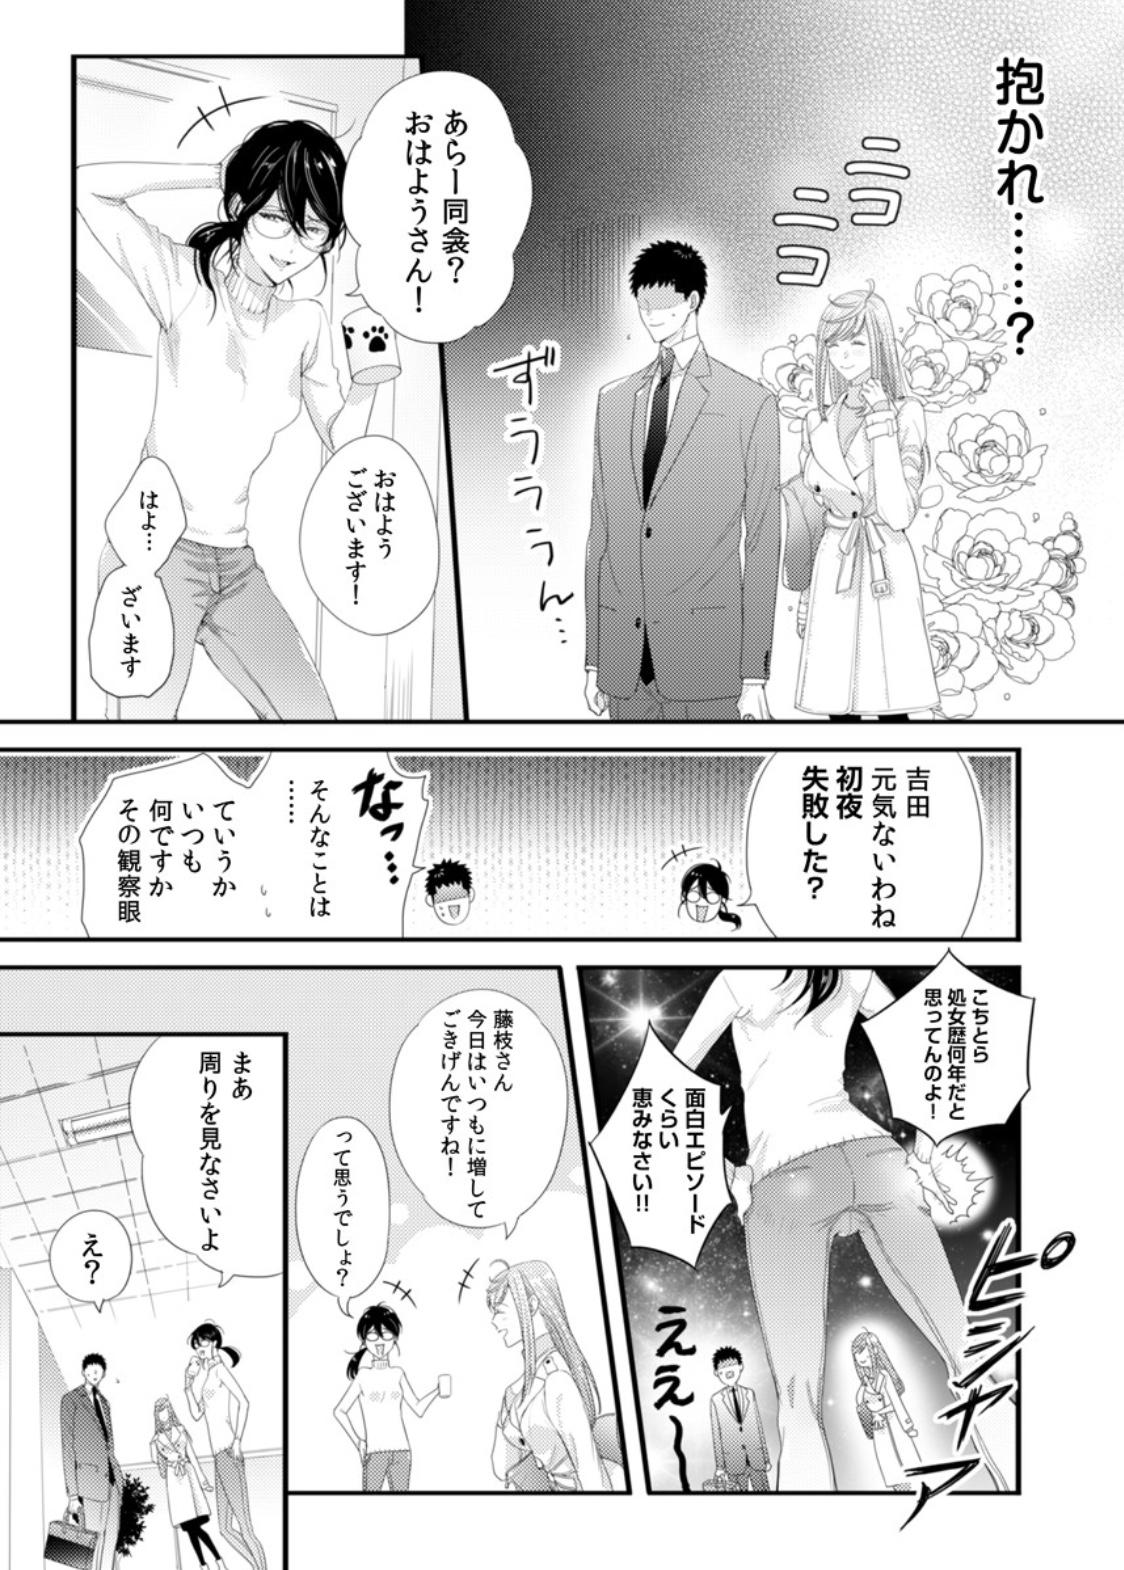 Please Let Me Hold You Futaba-San! Ch. 1-4 66